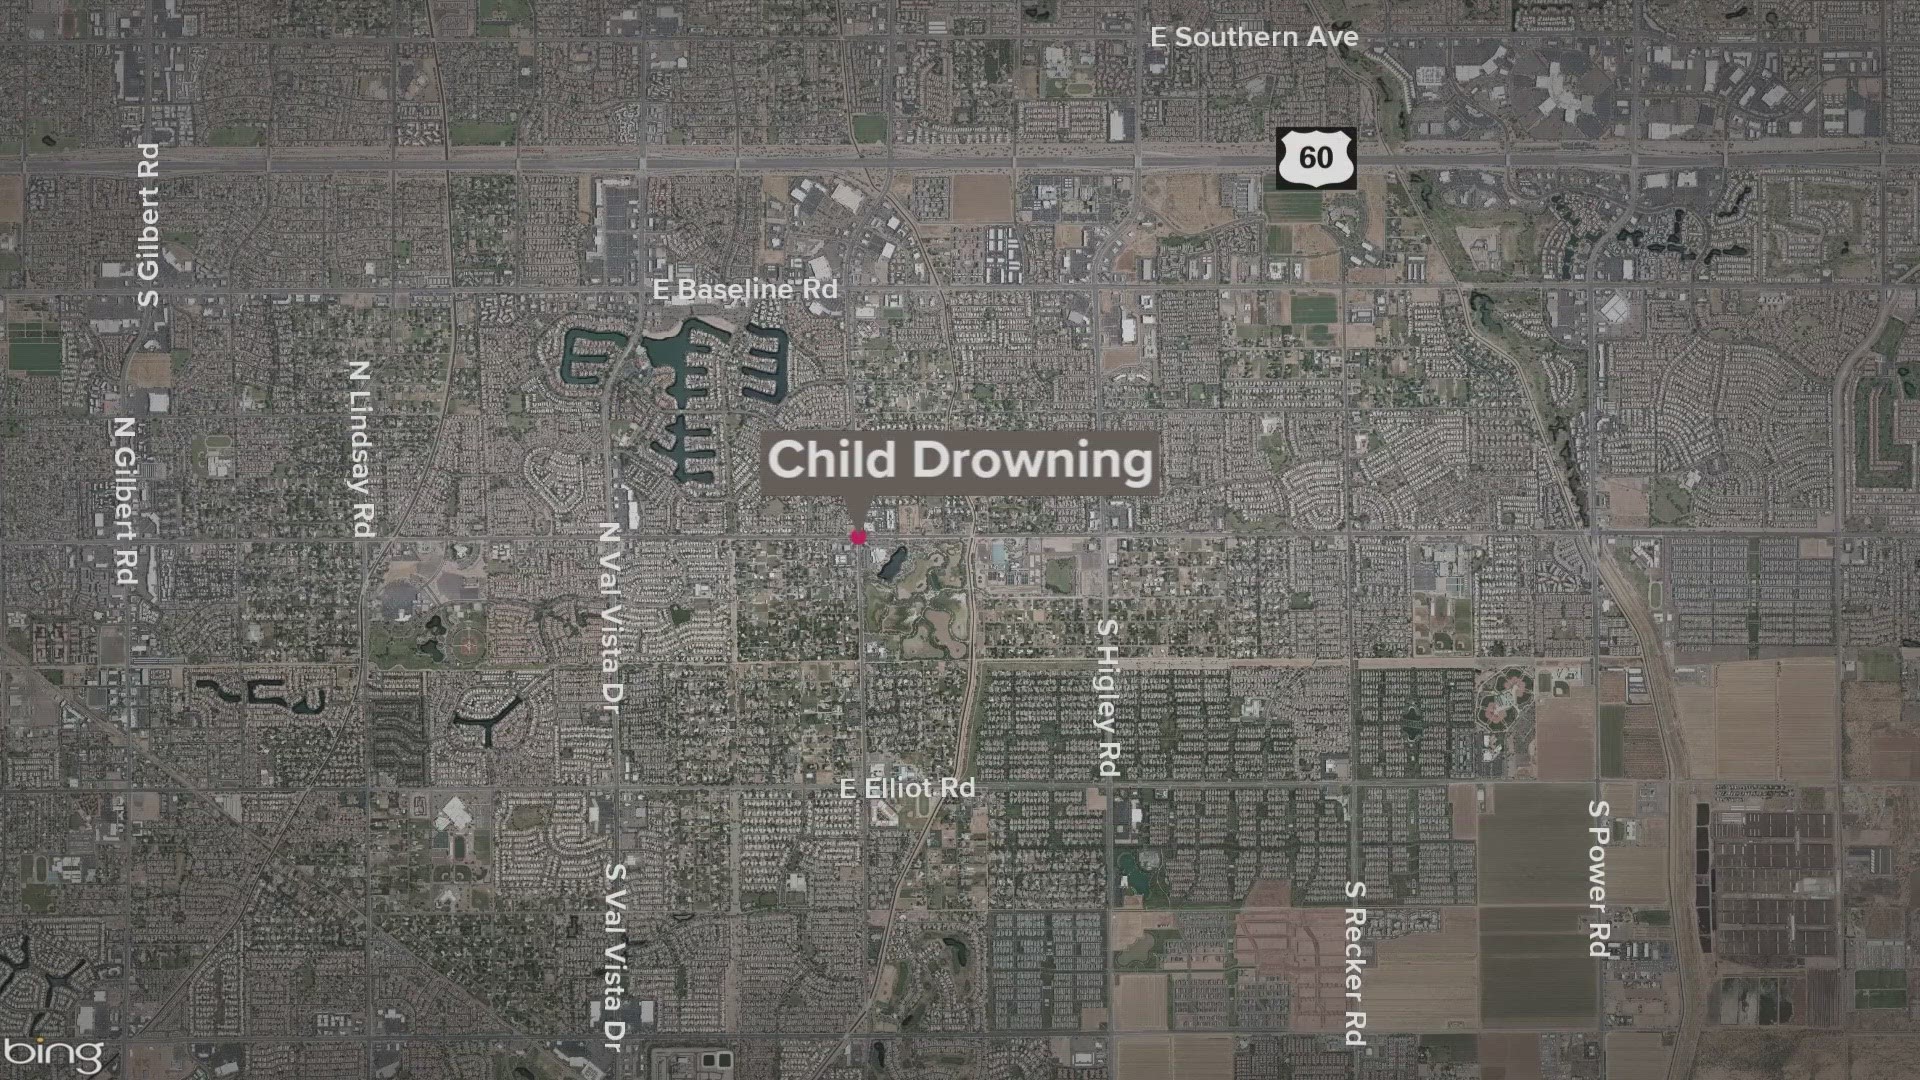 First responders performed life-saving measures on the child but the child died, Gilbert police said.